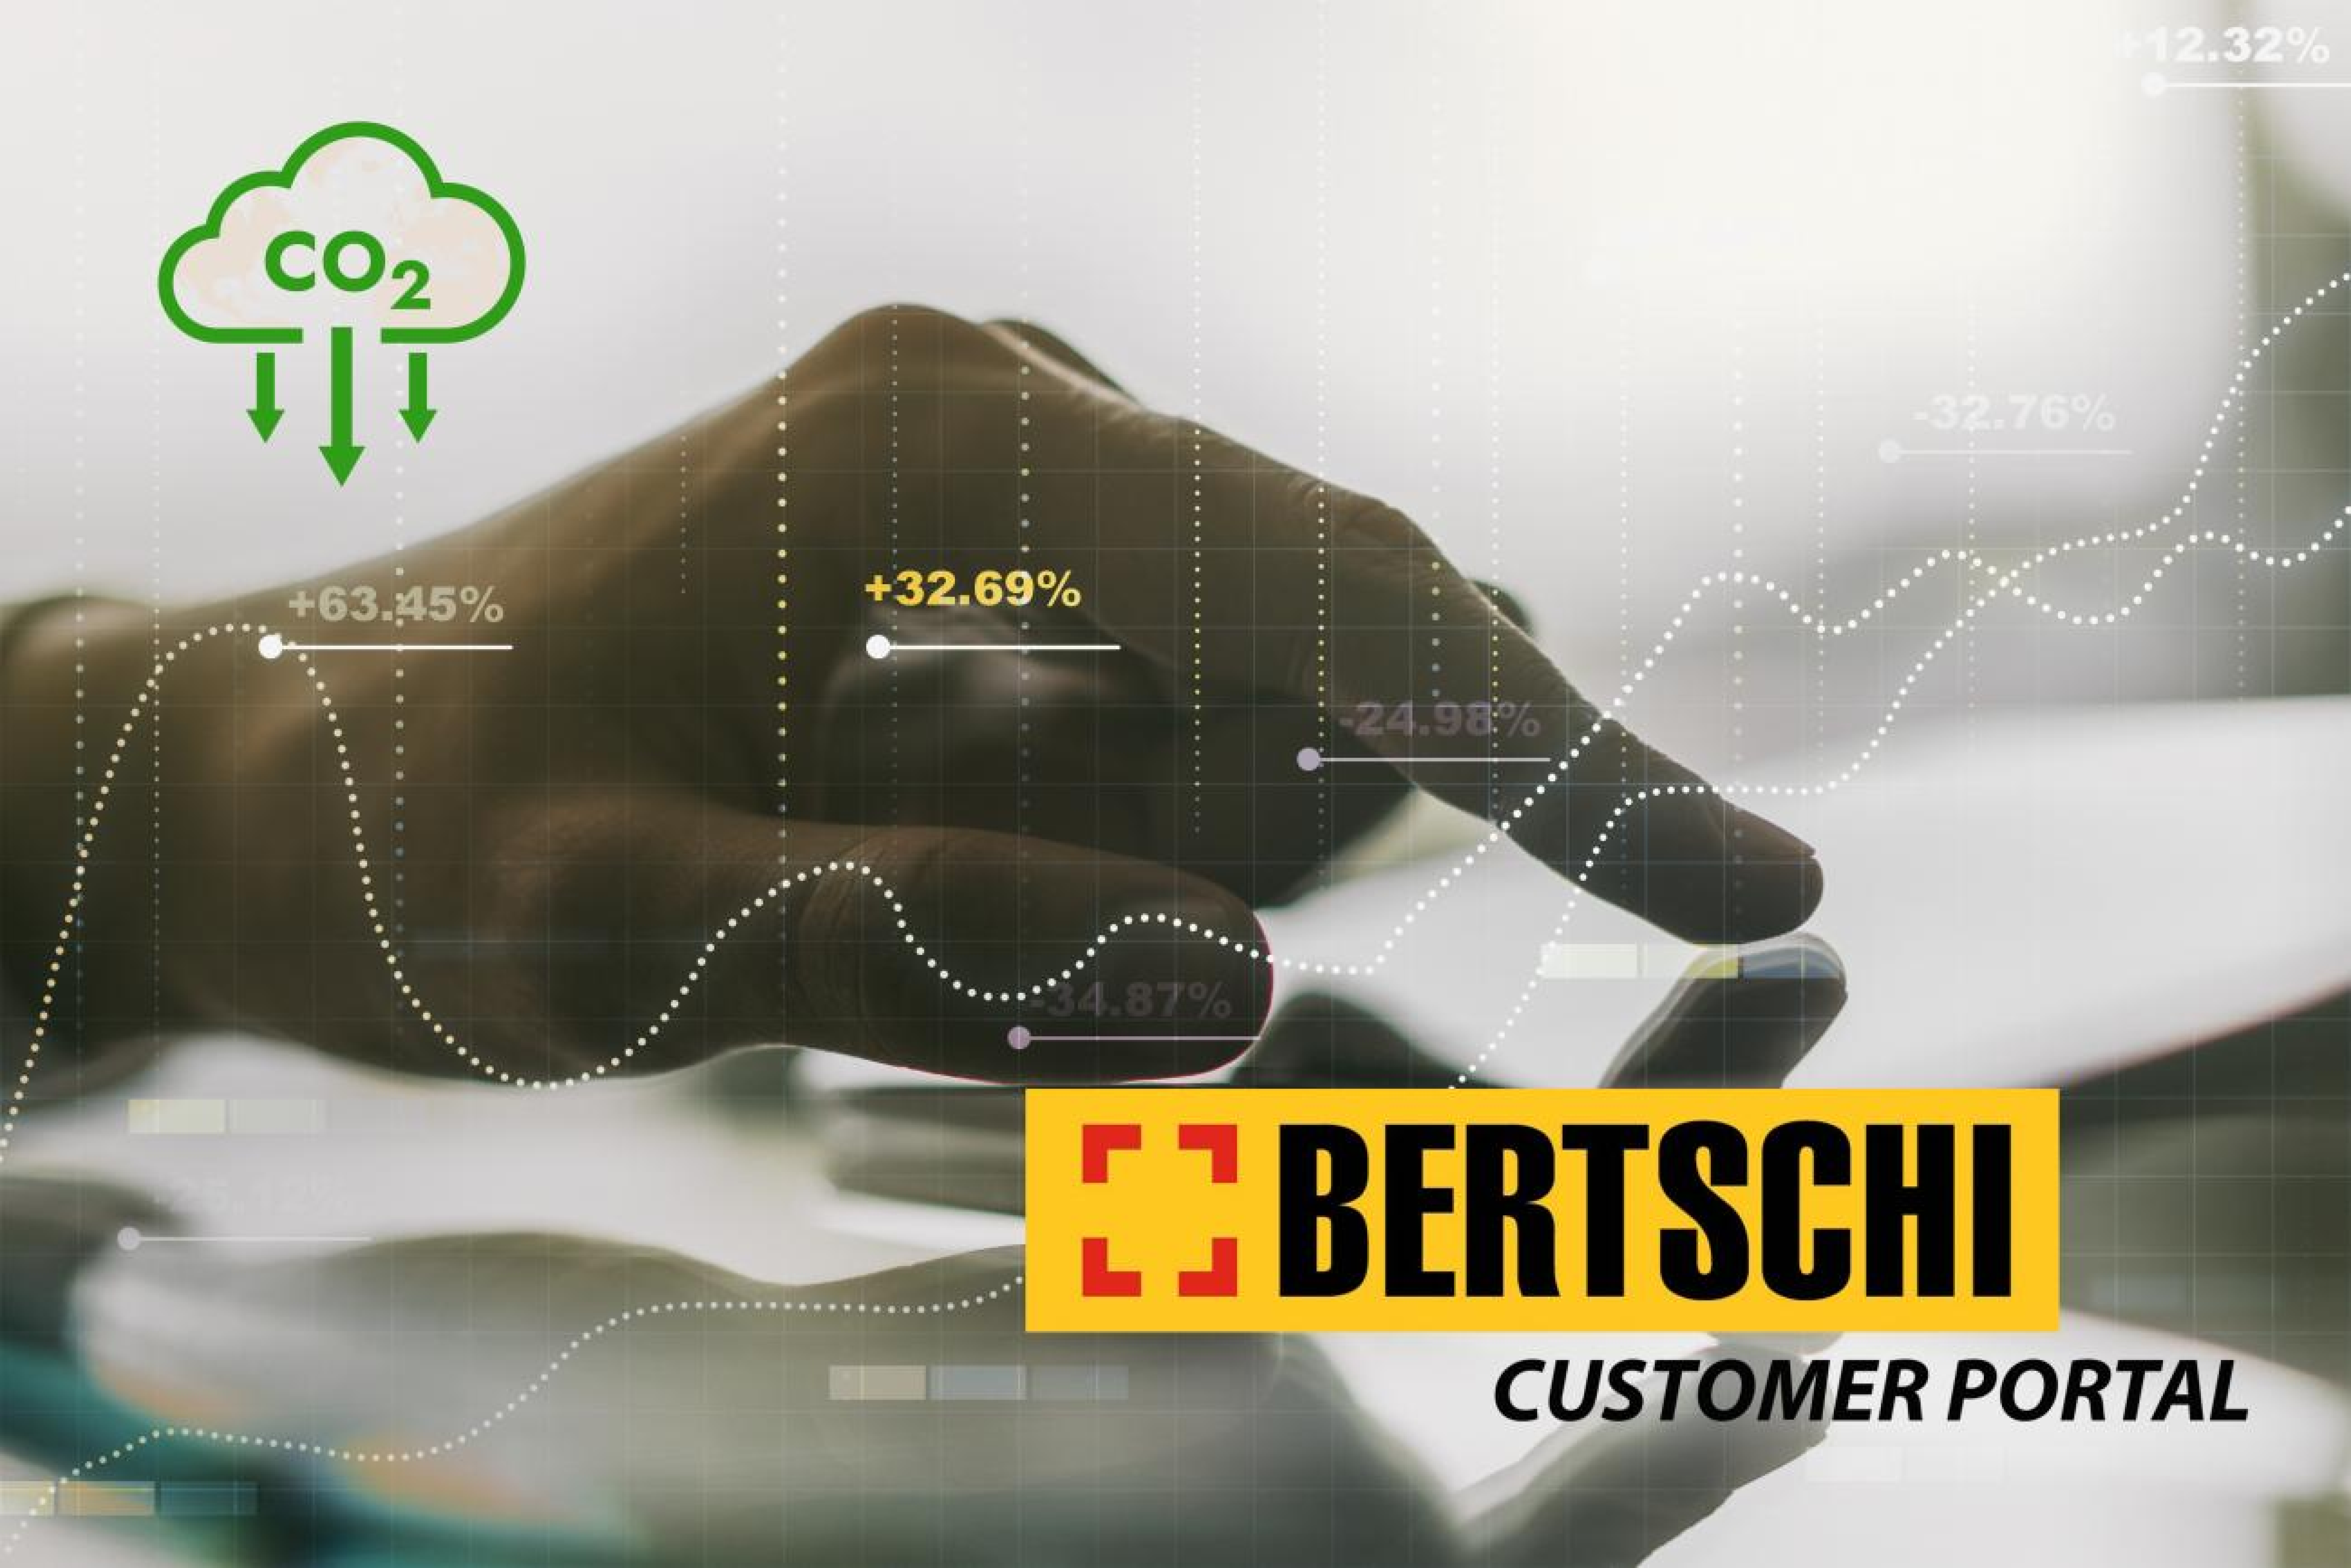 Emission Reports within the Bertschi Customer Portal